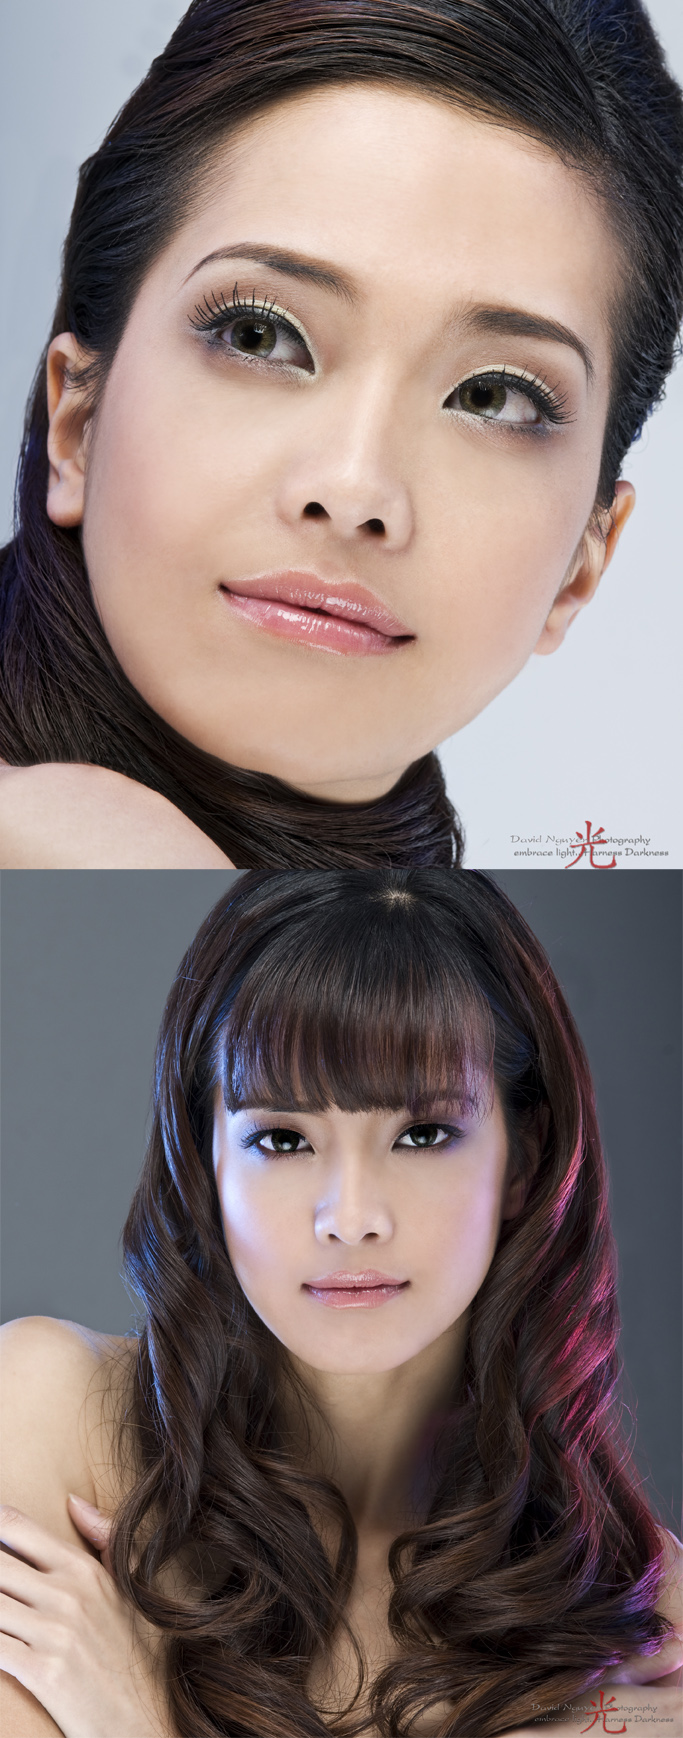 Female model photo shoot of Kim T Nguyen and Jewdee by David Nguyen Studio in Santa Ana, CA, retouched by v i k t o r, makeup by Jacky Tai Nguyen